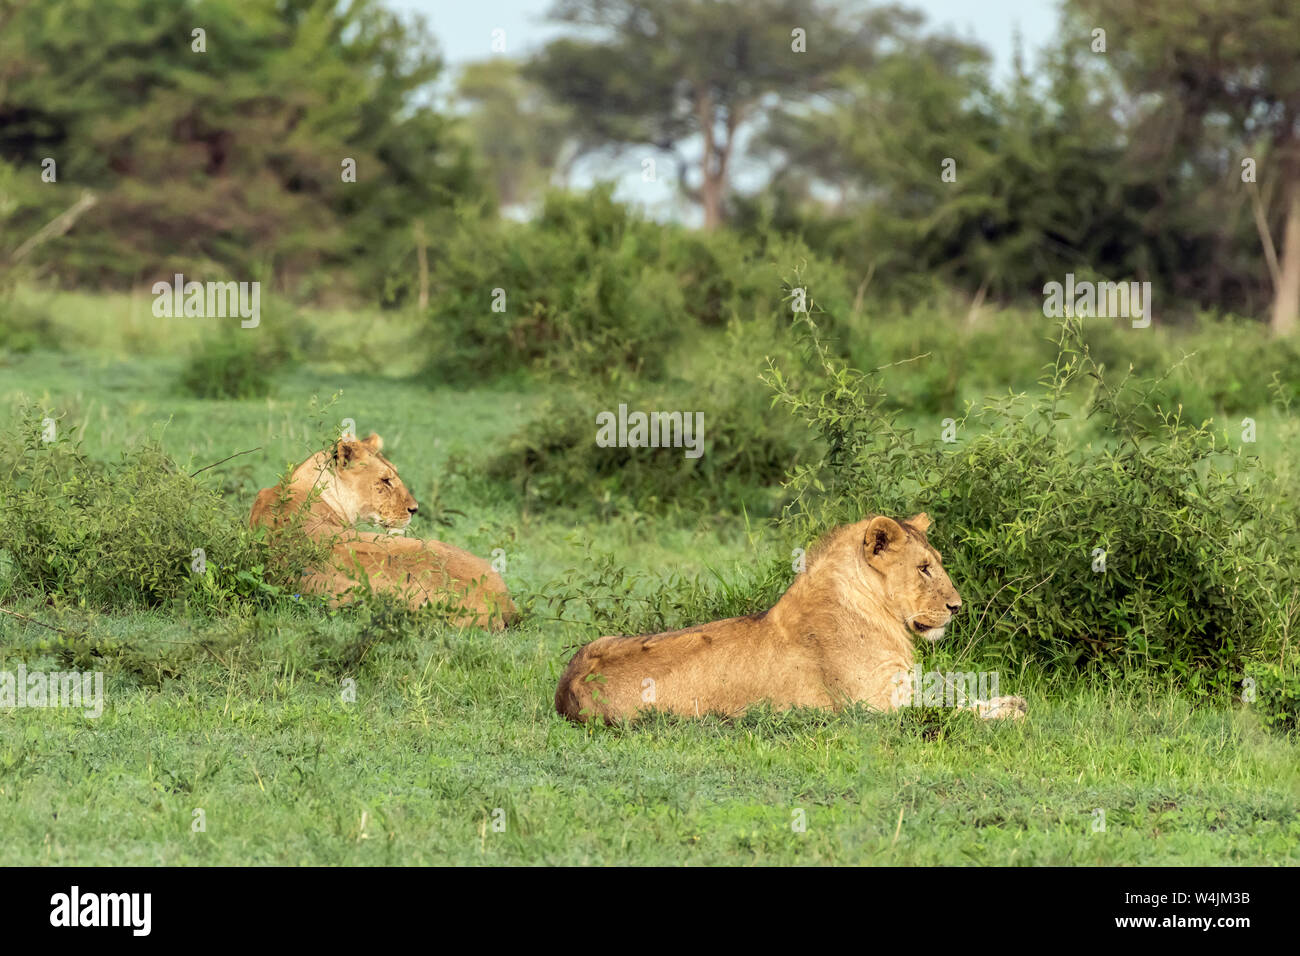 Flies on the heads of male and female lions in the fresh grass, Grumeti Game Reserve, Serengeti, Tanzania Stock Photo